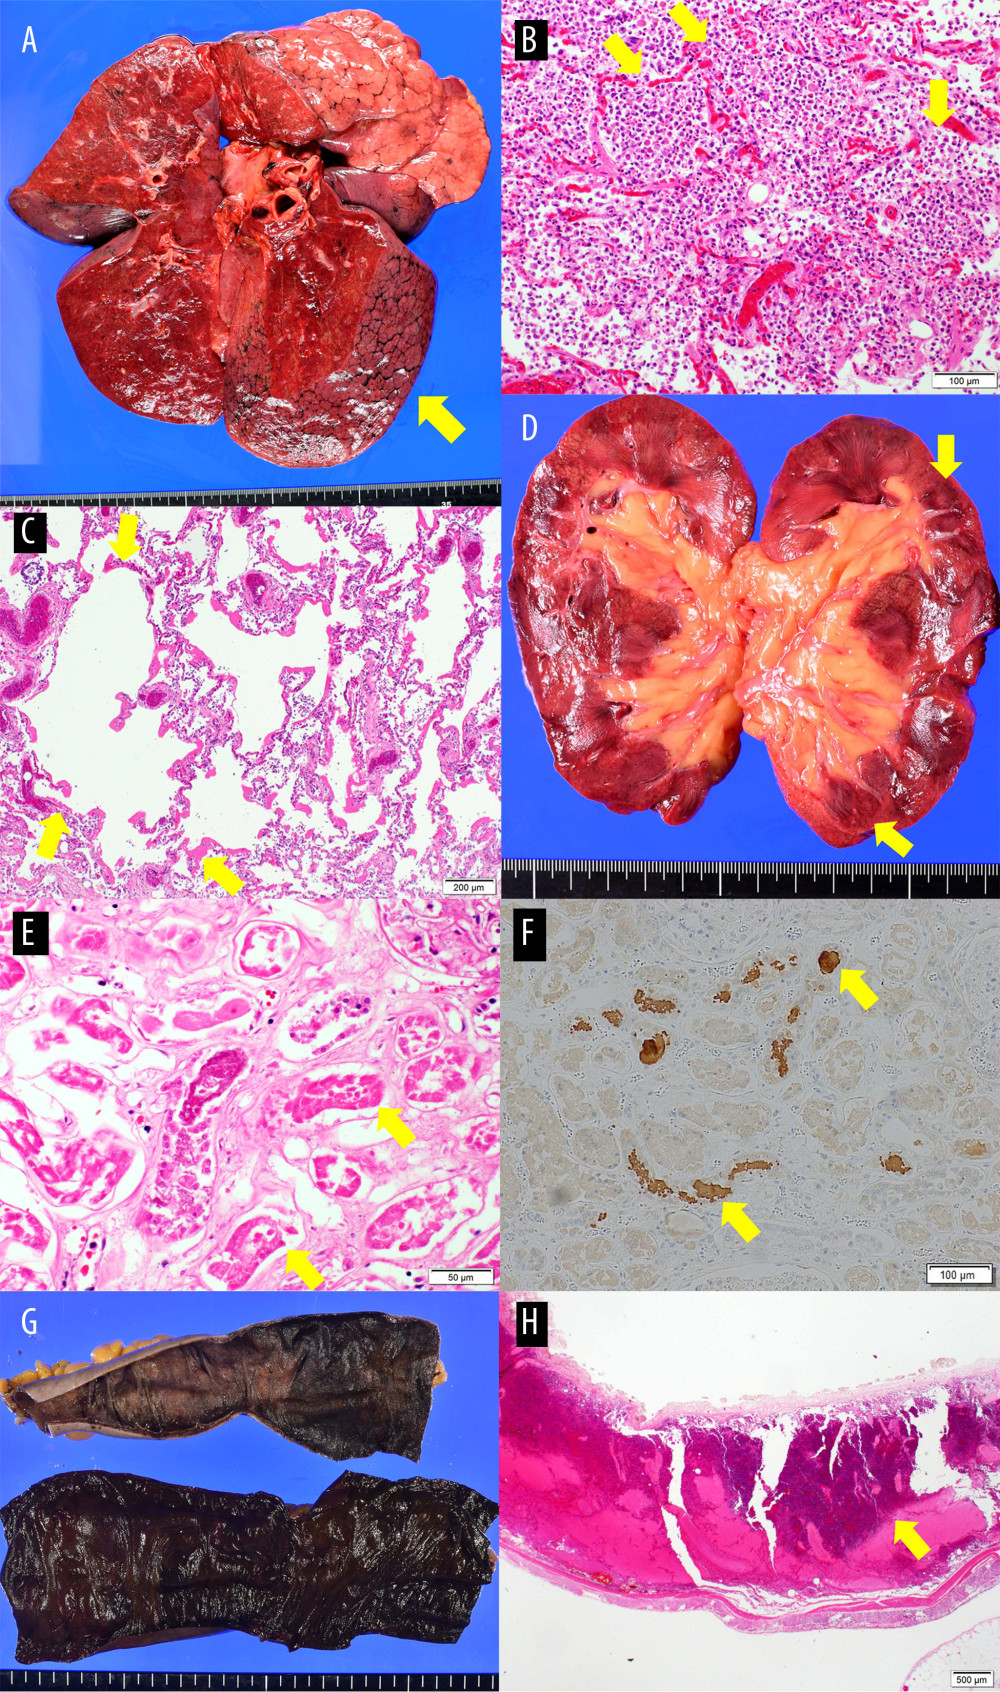 Findings from the autopsy of the lung, kidney, and small and large intestines. (A) Lung showing massive consolidation in the right lower lobe (arrow). (B) Neutrophil cell infiltration within the alveoli observed in the right lower lobe (arrow). (C) Enlargement of the alveolar space and hyaline membrane formation in the upper right lobe (arrow). (D) Clear border between the pale renal cortex and the congestion in the medullary region (arrow). (E) Tubular epithelial cell desquamation and casts observed (arrow). (F) Immunohistological study using an anti-myoglobin antibody showing myoglobin casts in the distal tubules (arrow). (G) The entire lumen of the small and large intestines showing hemorrhagic necrosis. (H) The small intestine showing diffuse submucosal hemorrhage and nonobstructive mesenteric insufficiency (arrow).